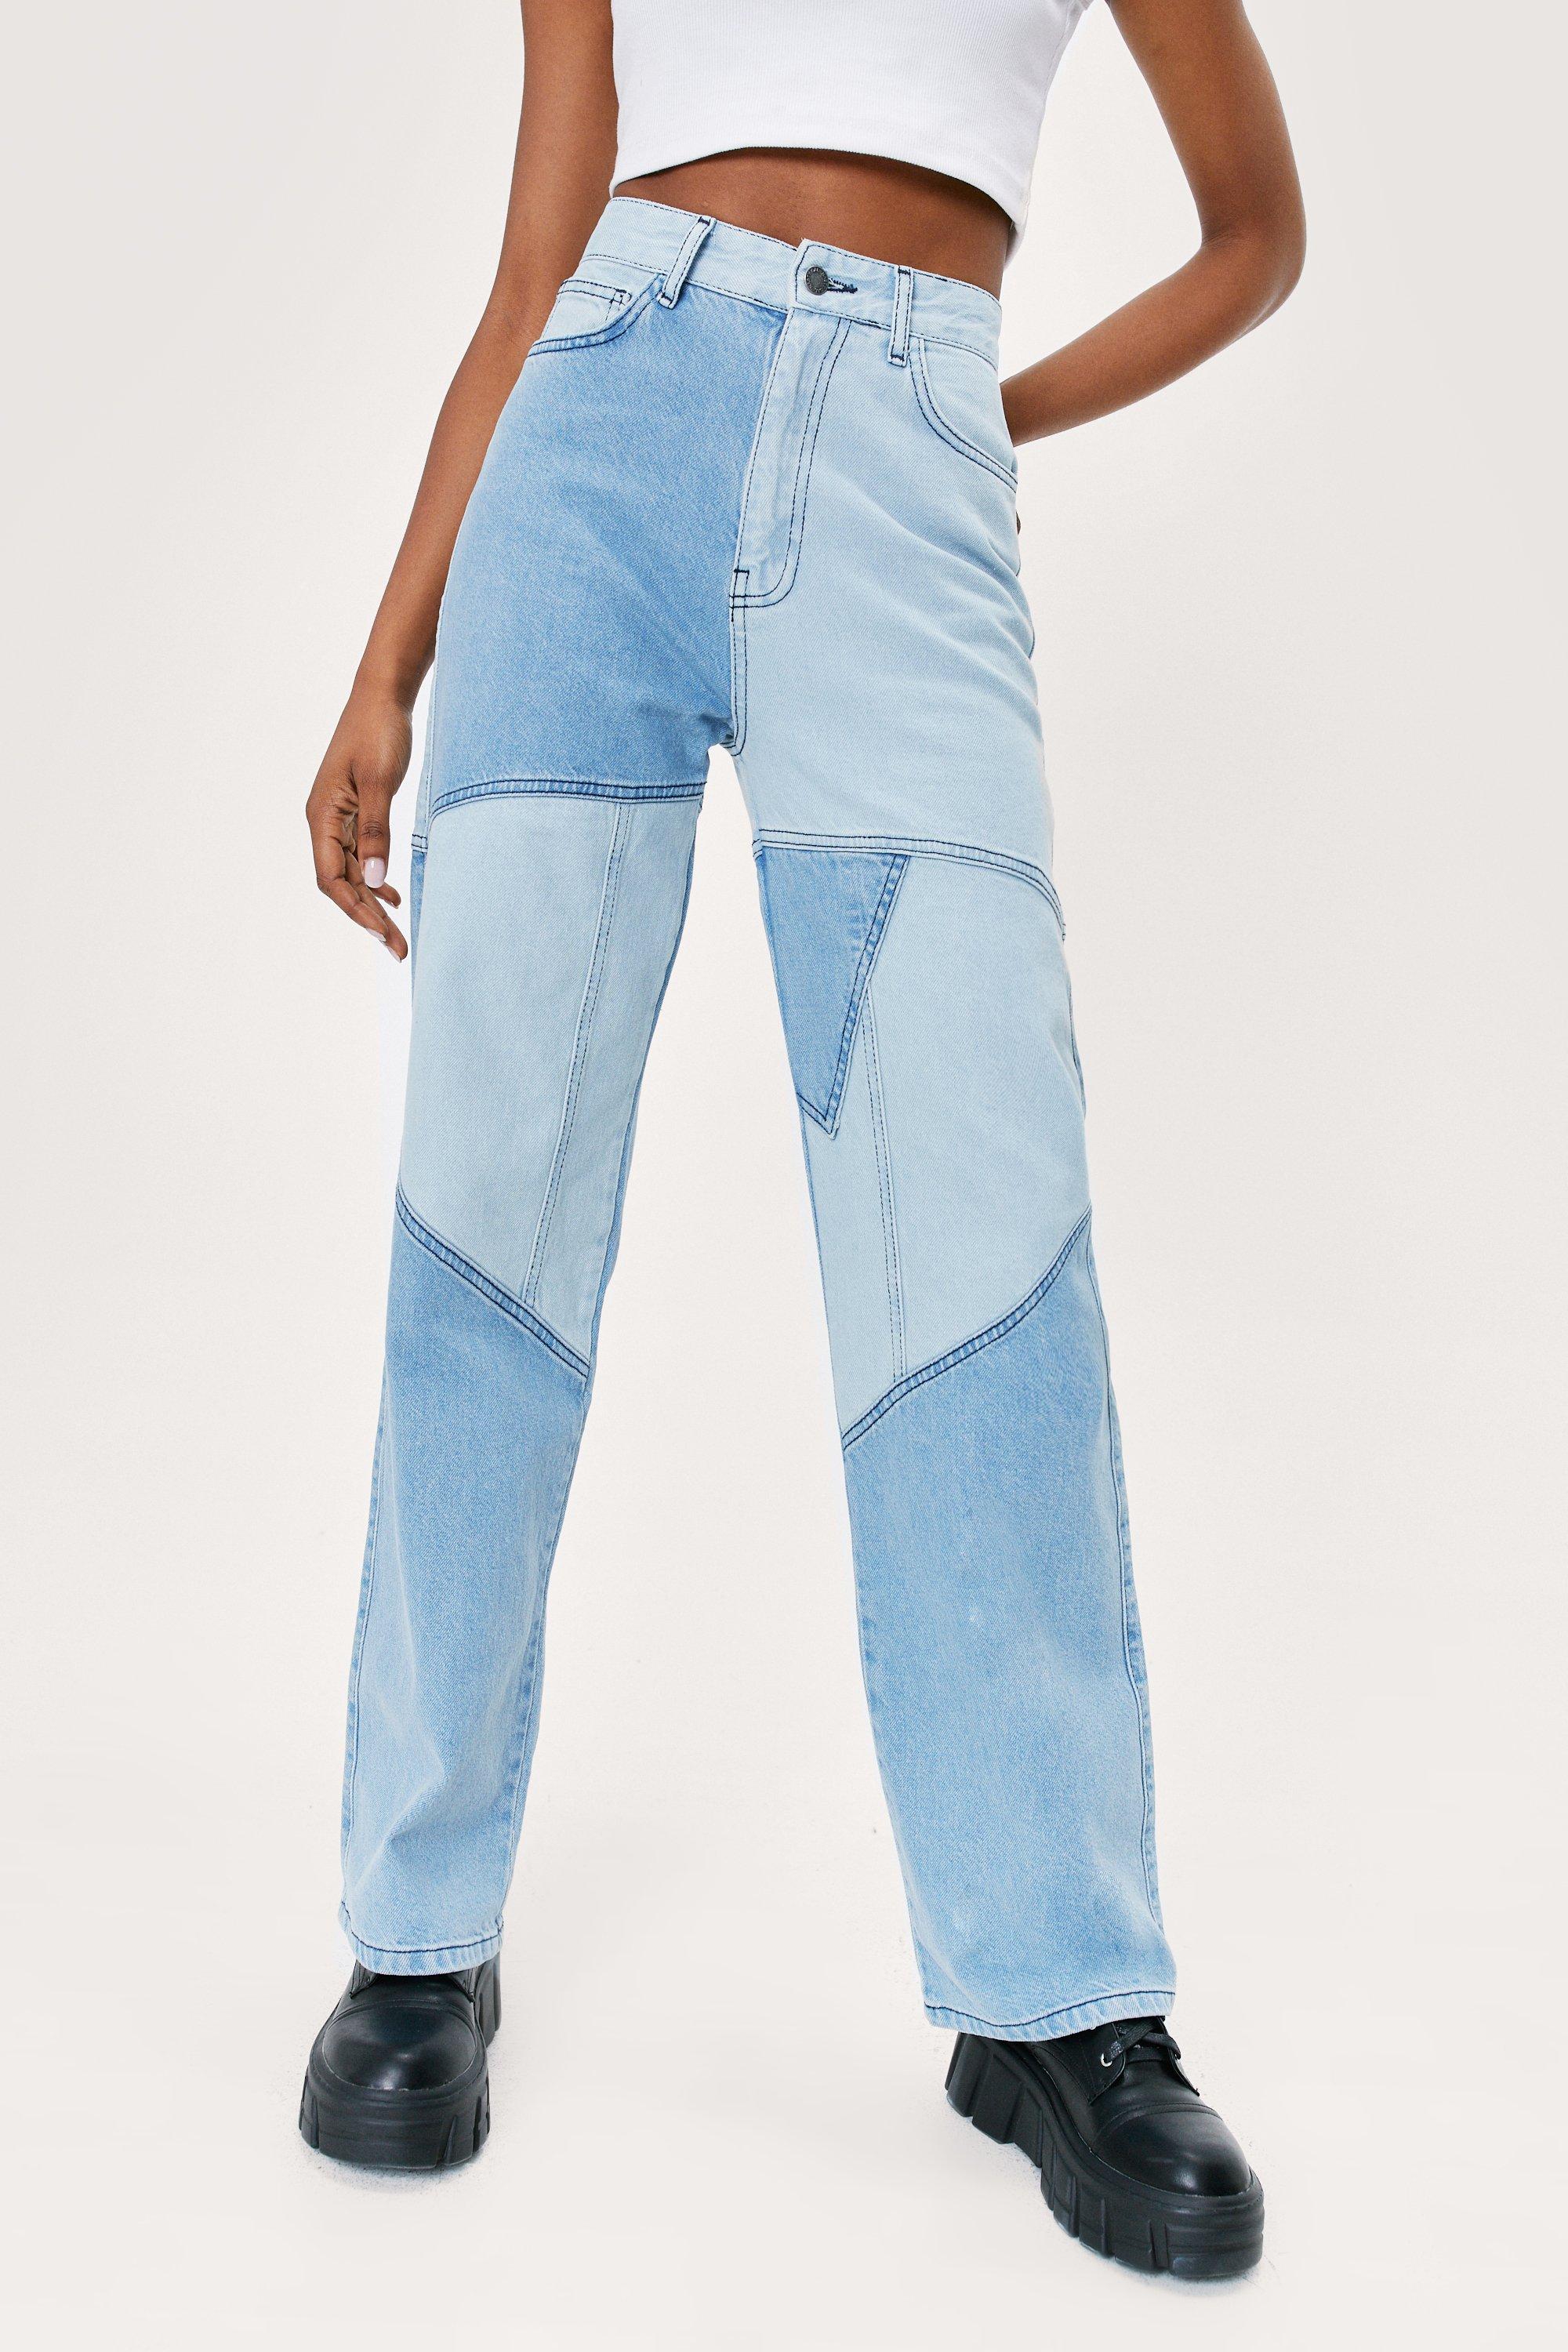 Nasty Gal Womens High Waisted Straight Leg Patchwork Two Tone Jeans -  ShopStyle